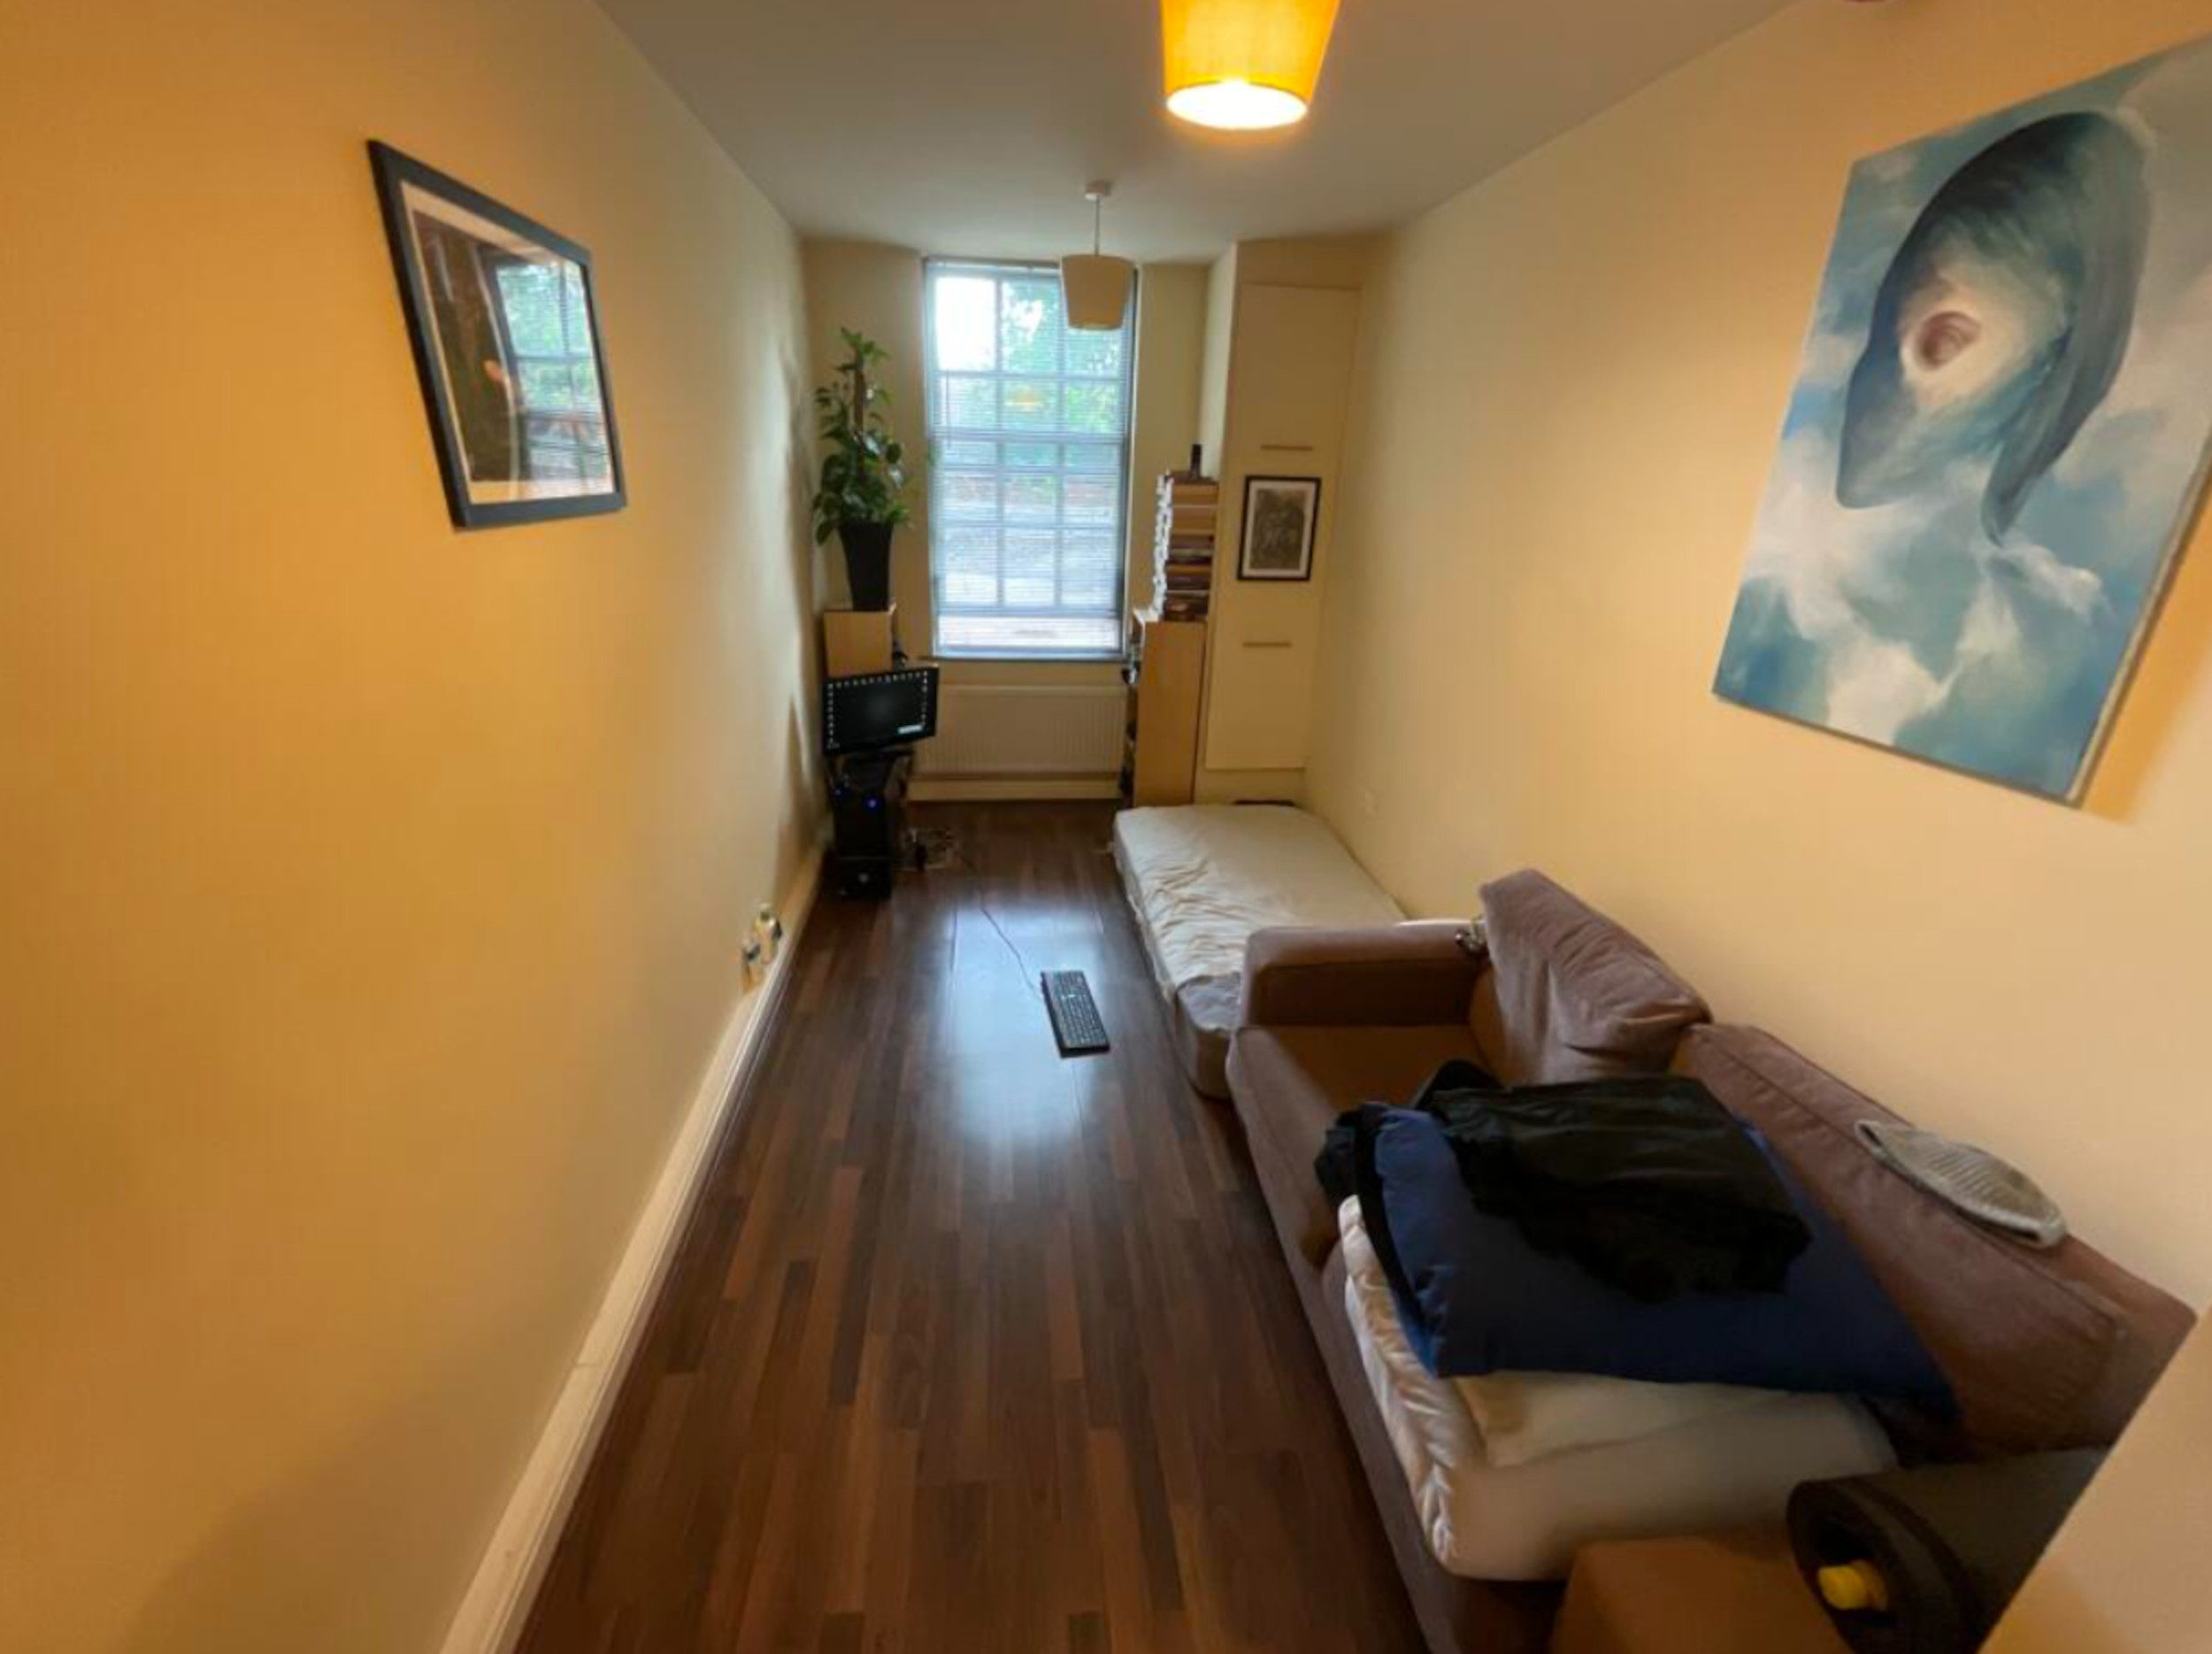 House-hunters left stunned by studio flat on sale for whopping £60k - which has drawn comparisons to a “corridor” 